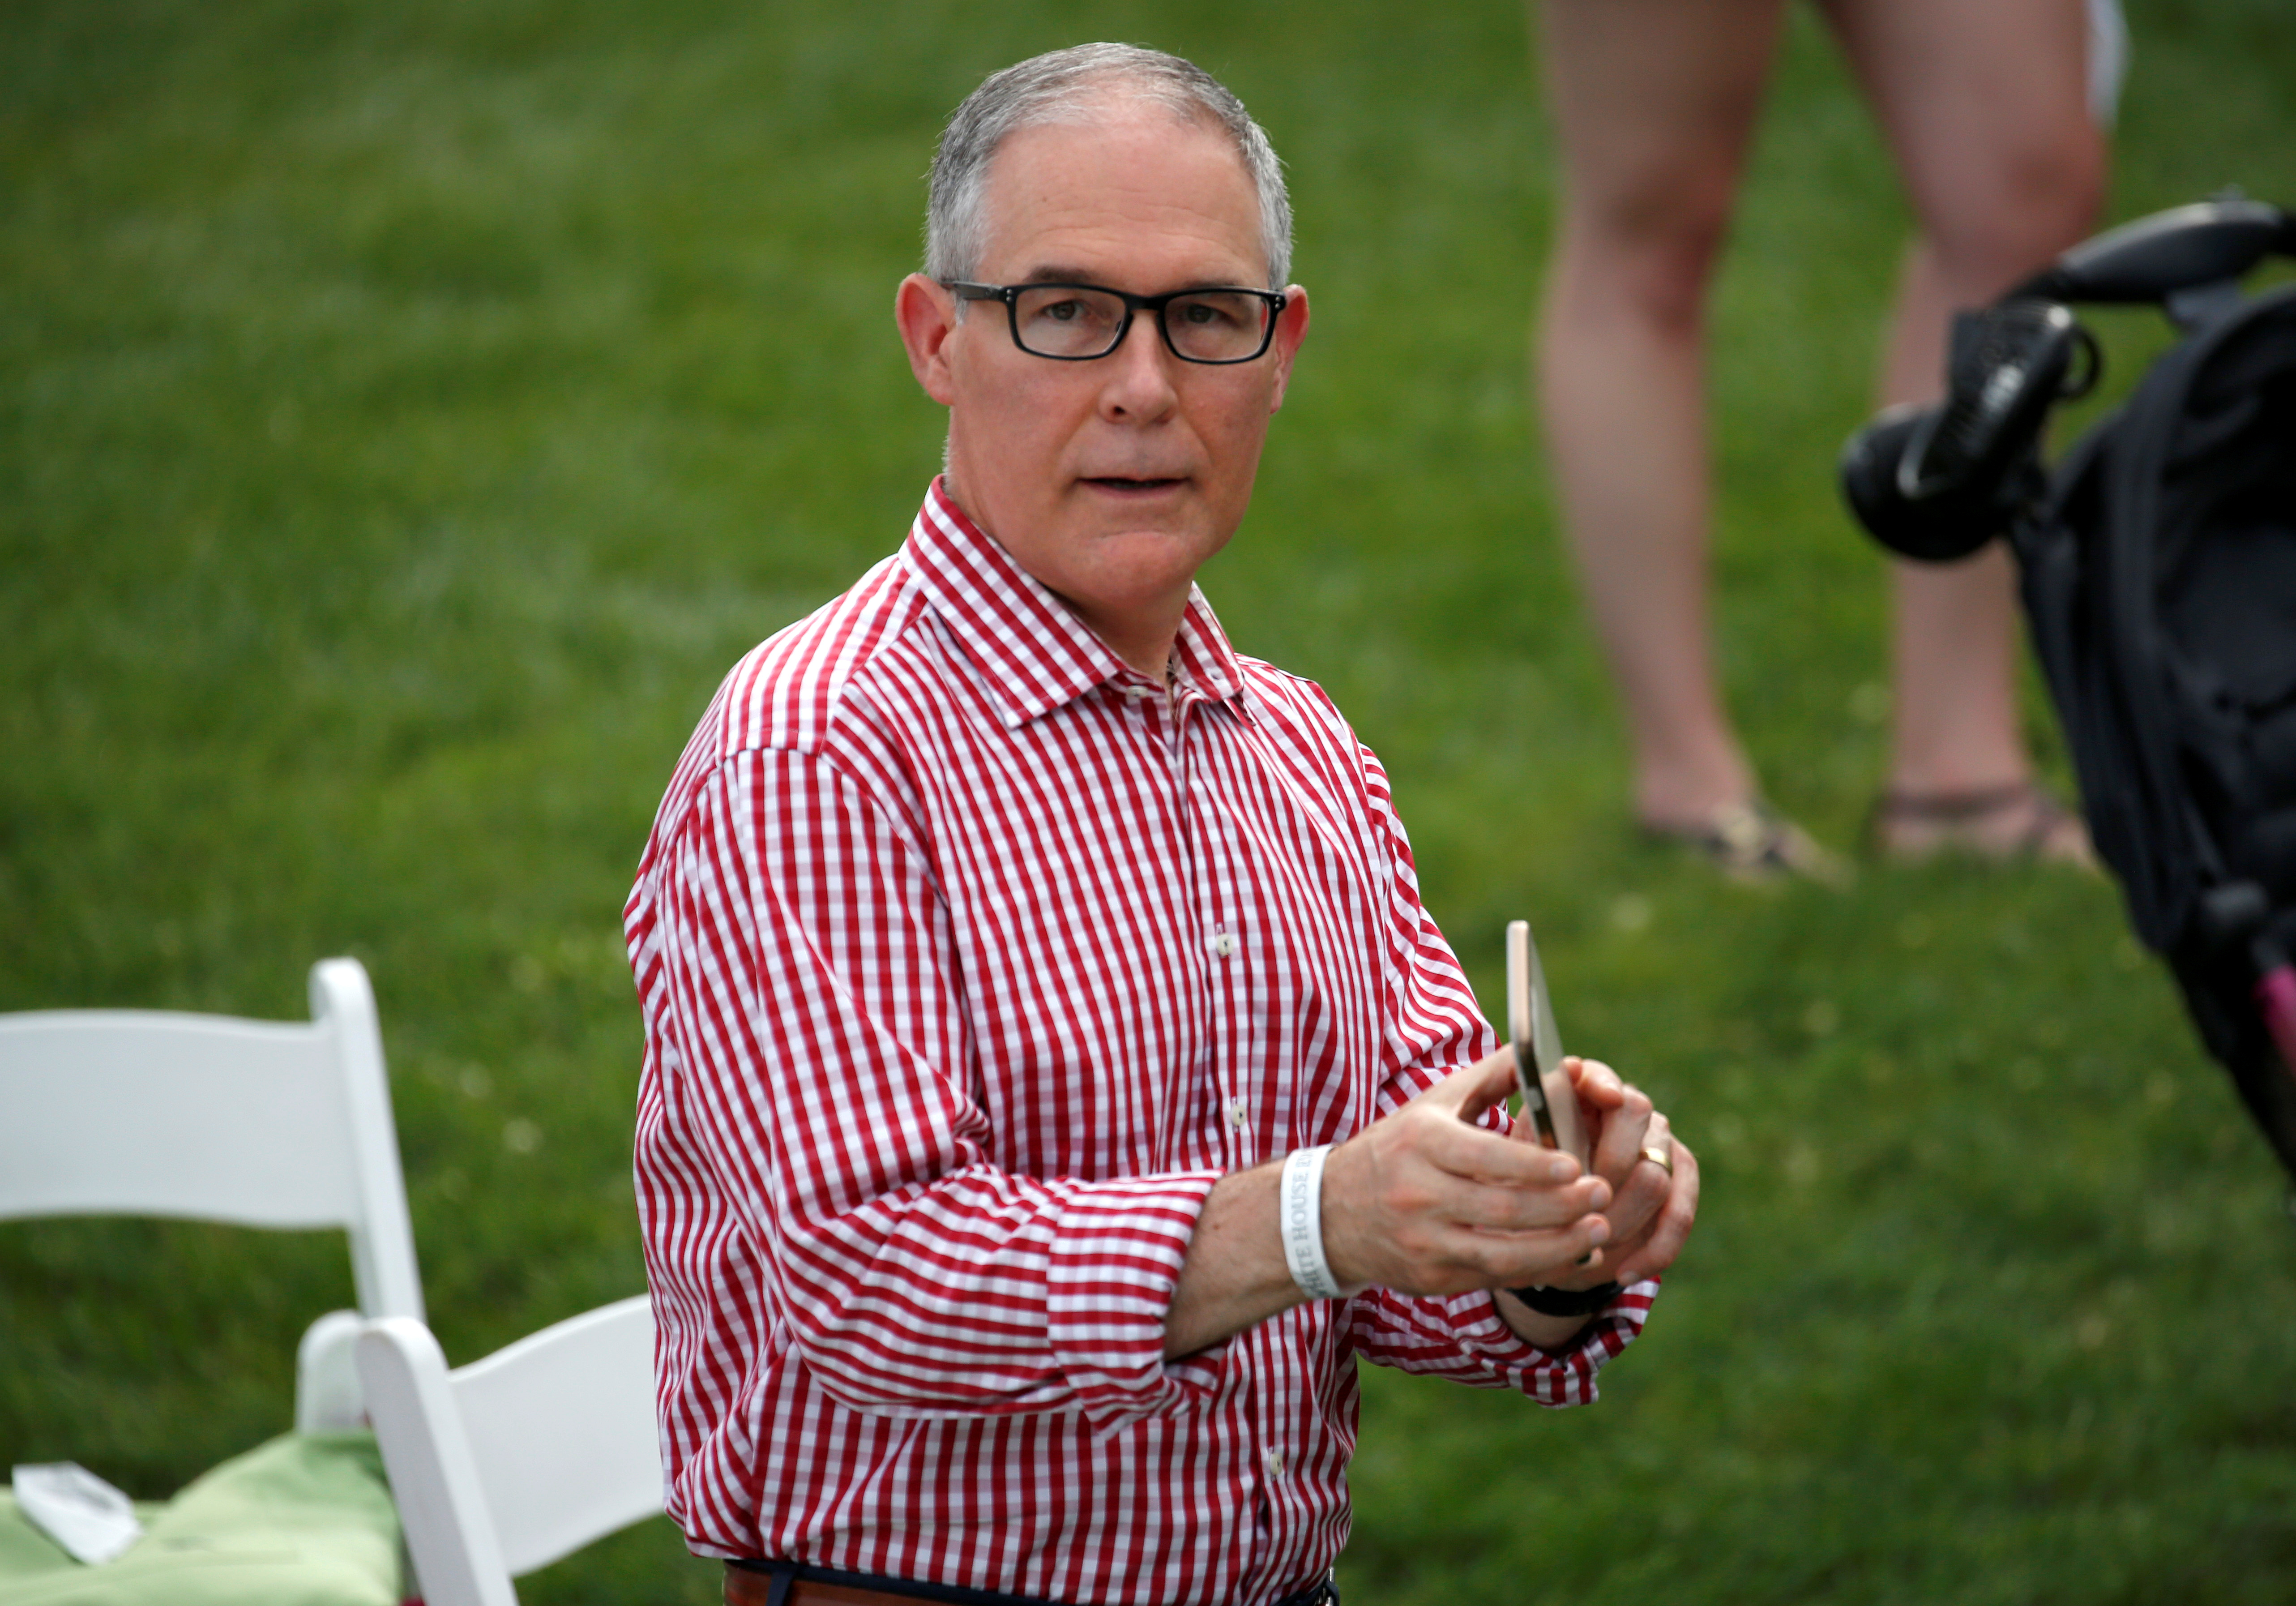 Administrator of the Environmental Protection Agency Scott Pruitt holds a mobile phone during a picnic for military families celebrating Independence Day at the White House in Washington